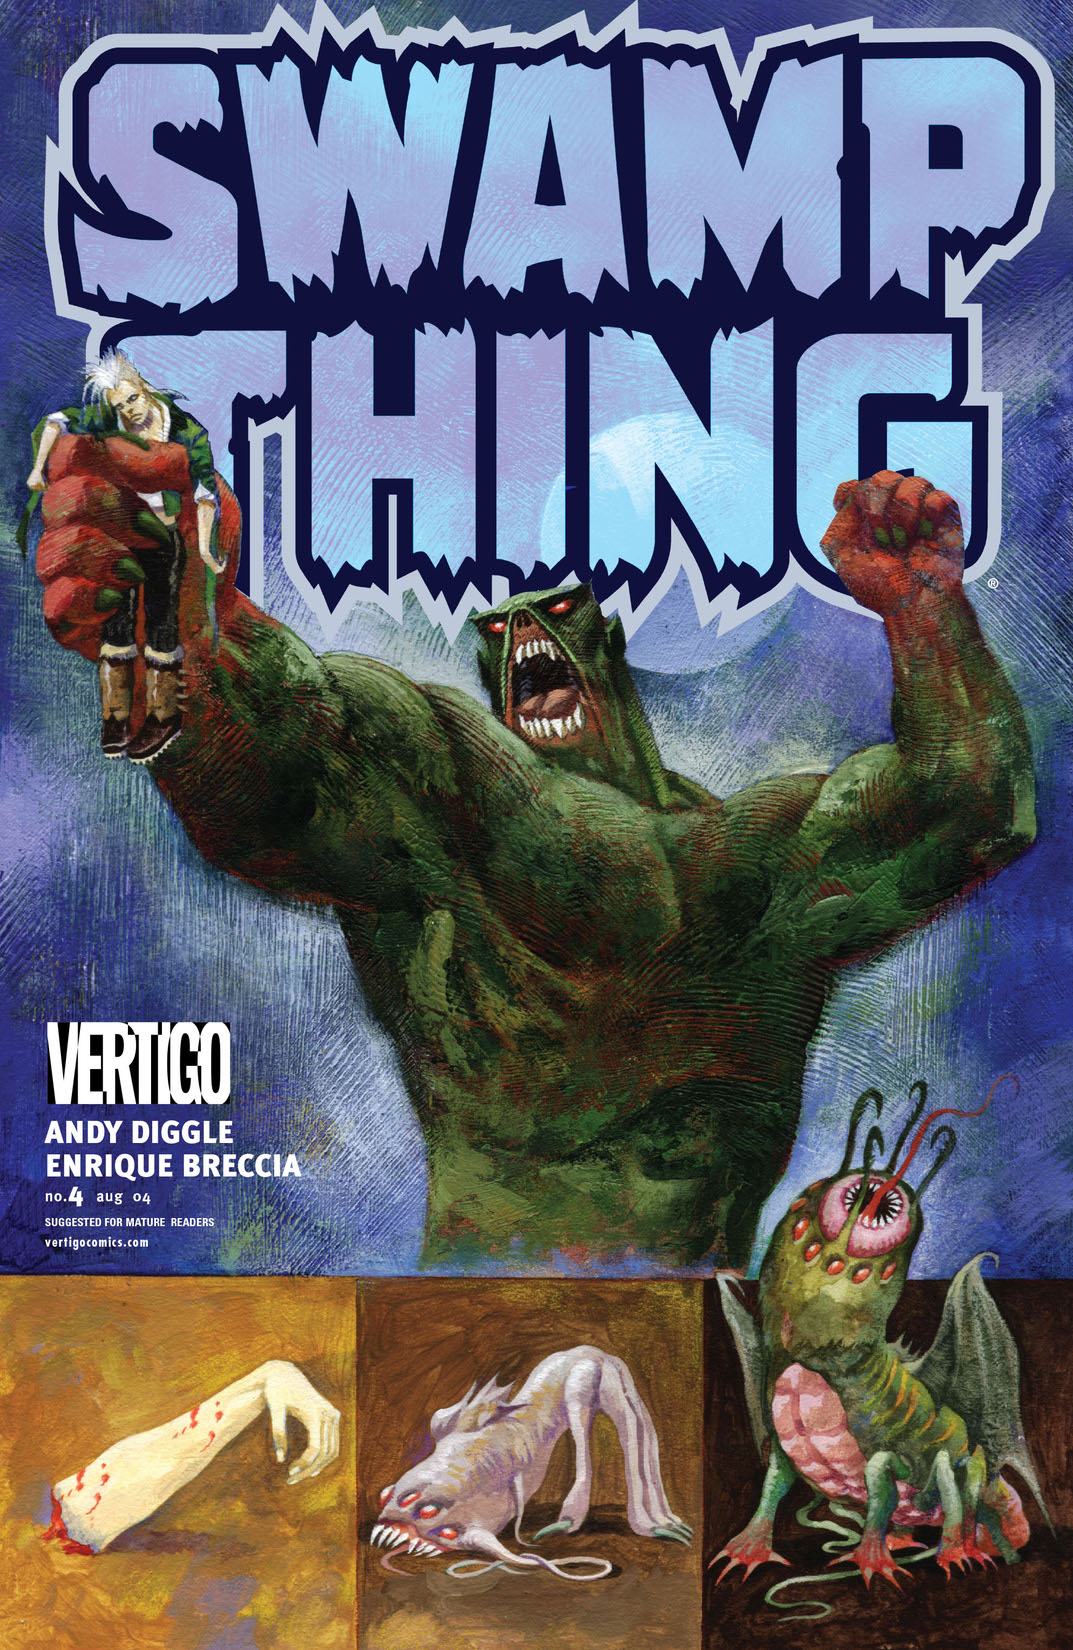 Swamp Thing (2004-) #4 preview images